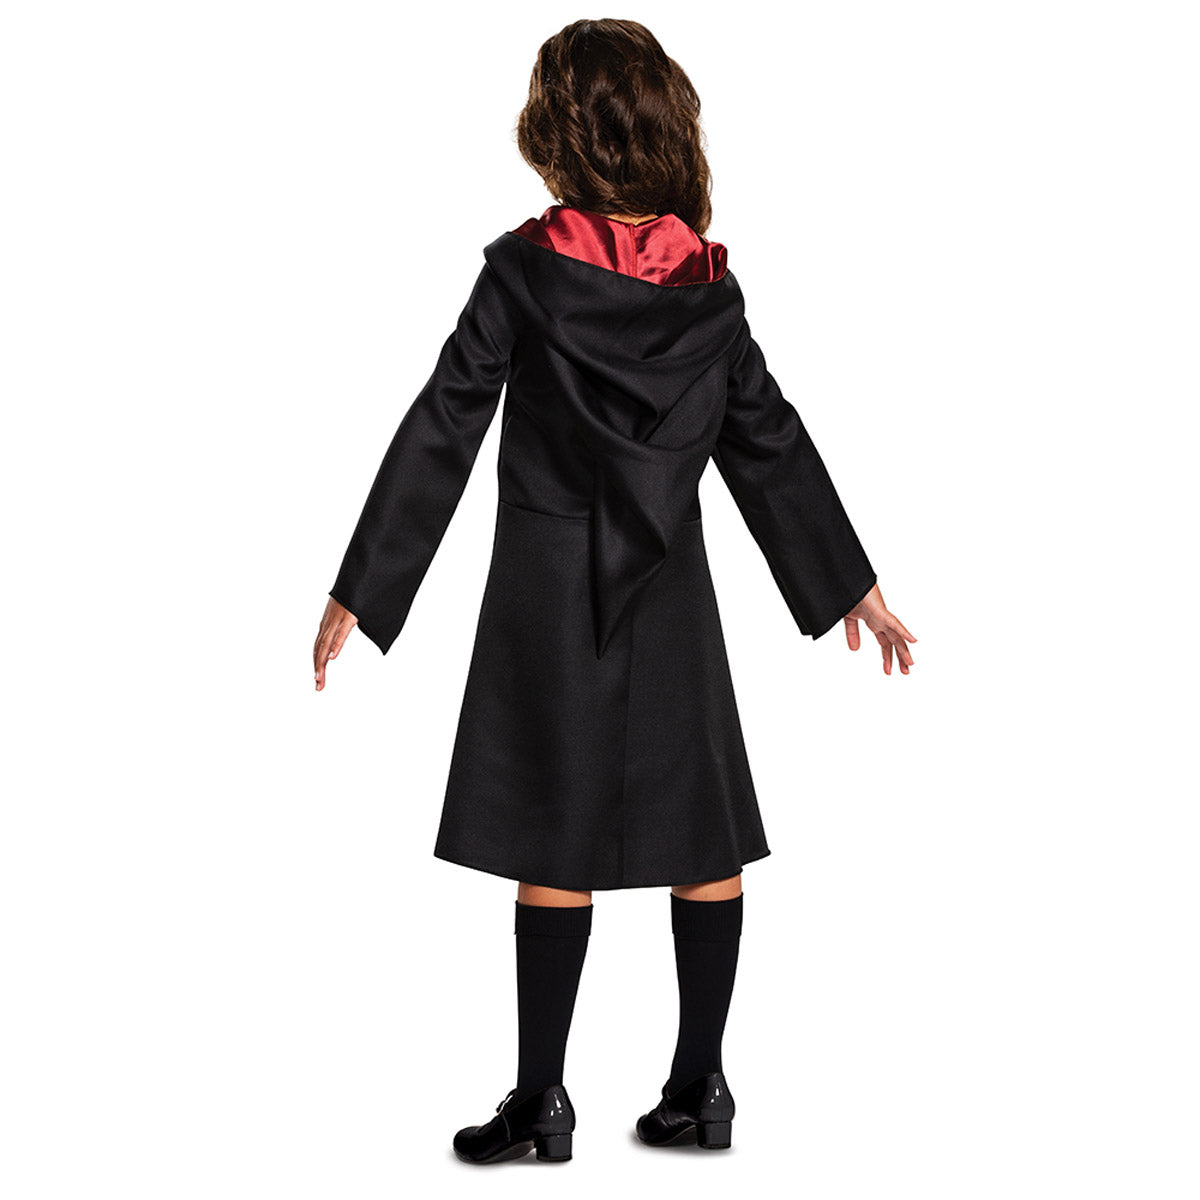 Hermione Granger Classic Disguise 107579